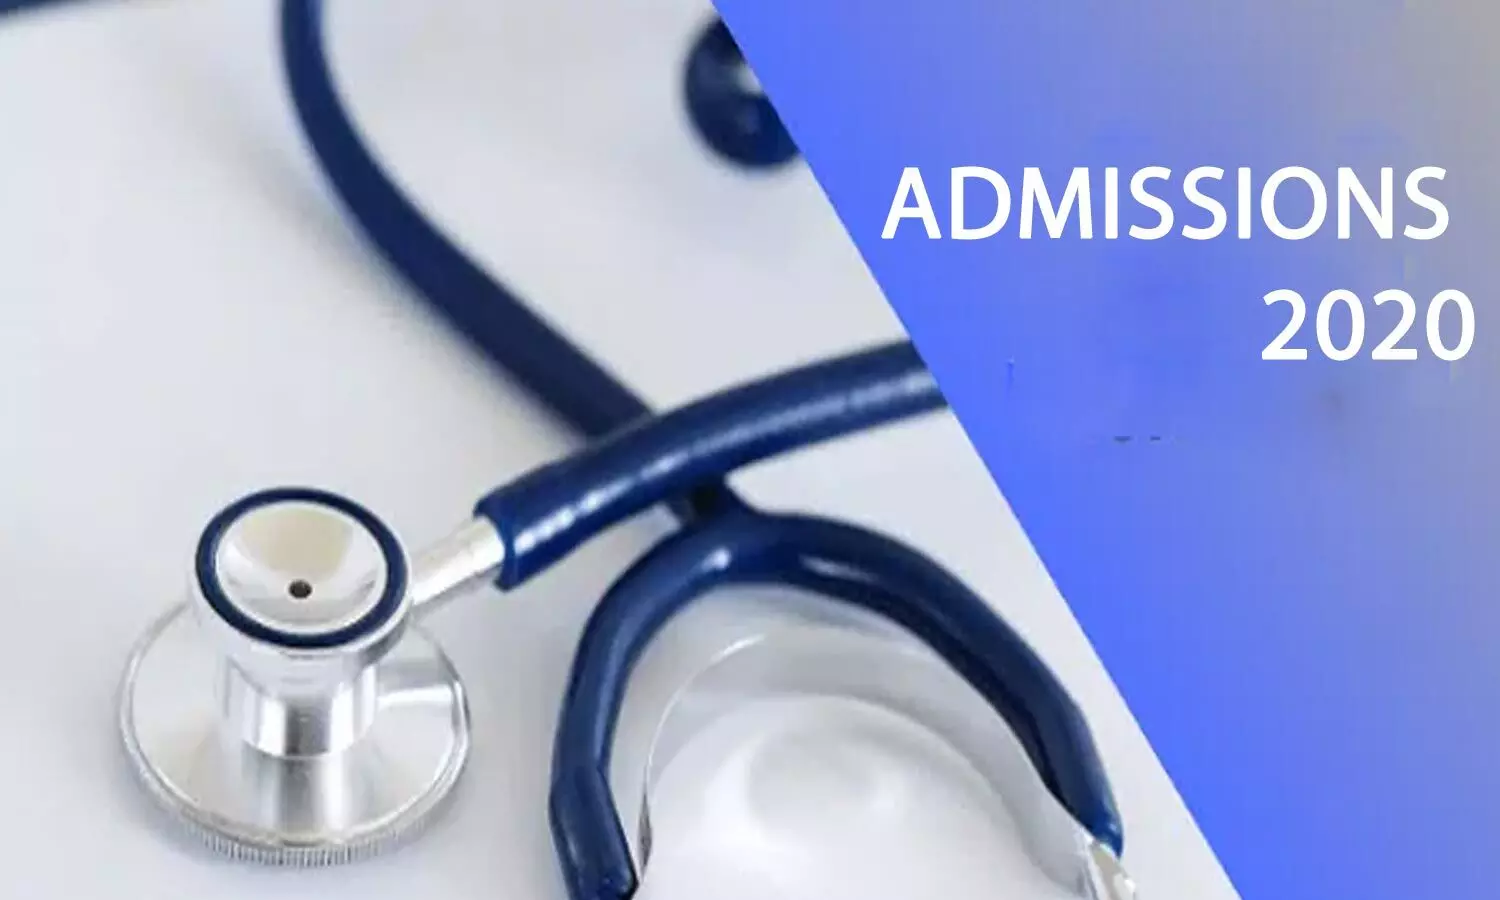 Allow PG Medical Admission to EWS candidates after changing category: MCC tells medical colleges